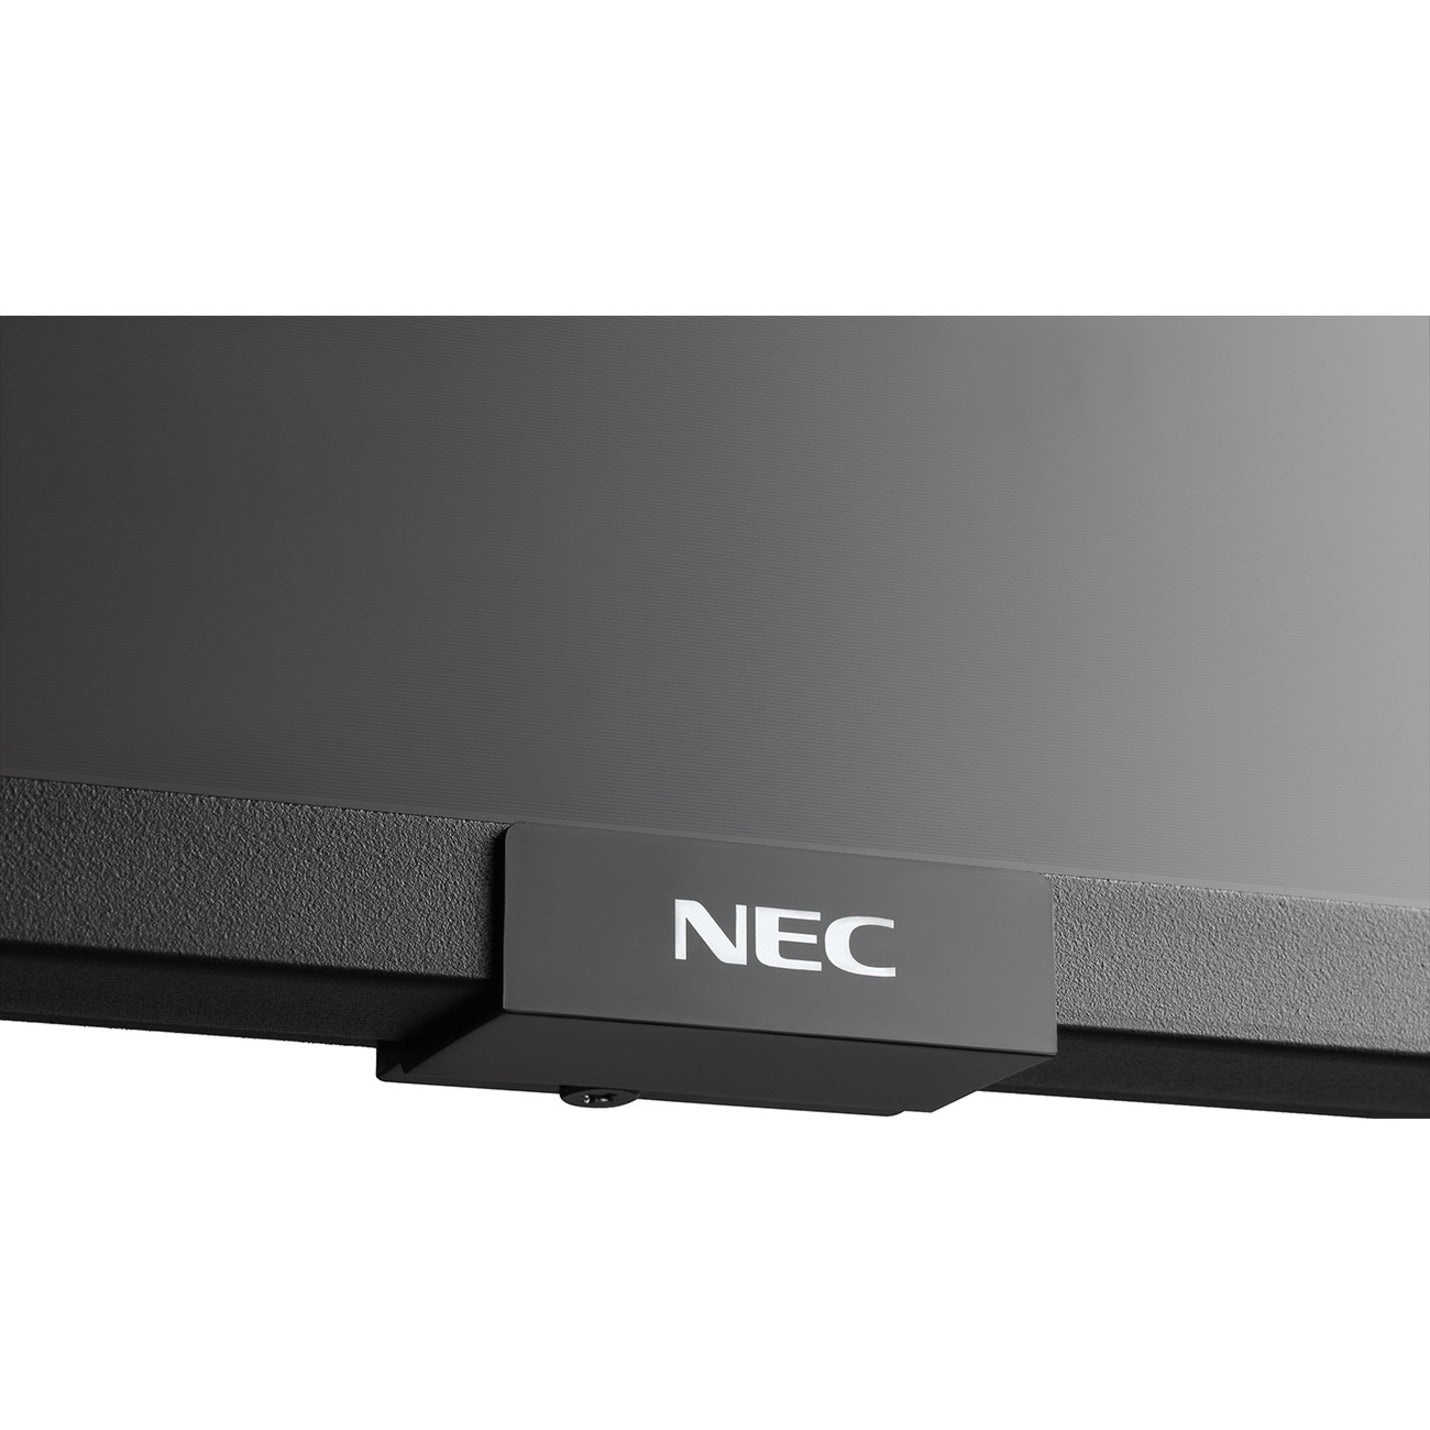 NEC Display ME501-AVT3 50" Ultra High Definition Commercial Display with Integrated ATSC/NTSC Tuner, 400 Nit, 8-bit+FRC, 2160p, 3 Year Warranty